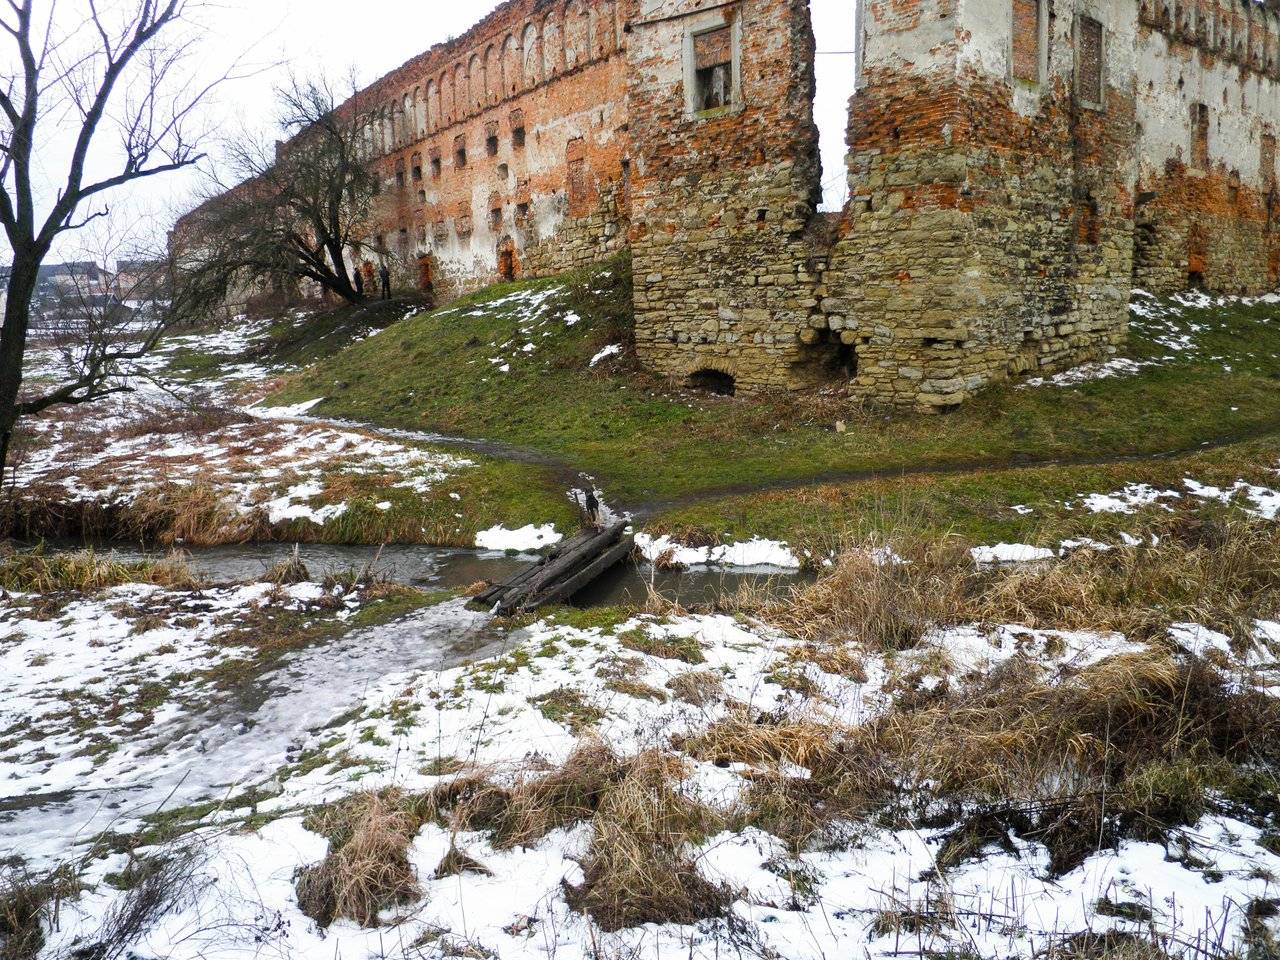 The walls of the castle are badly destroyed